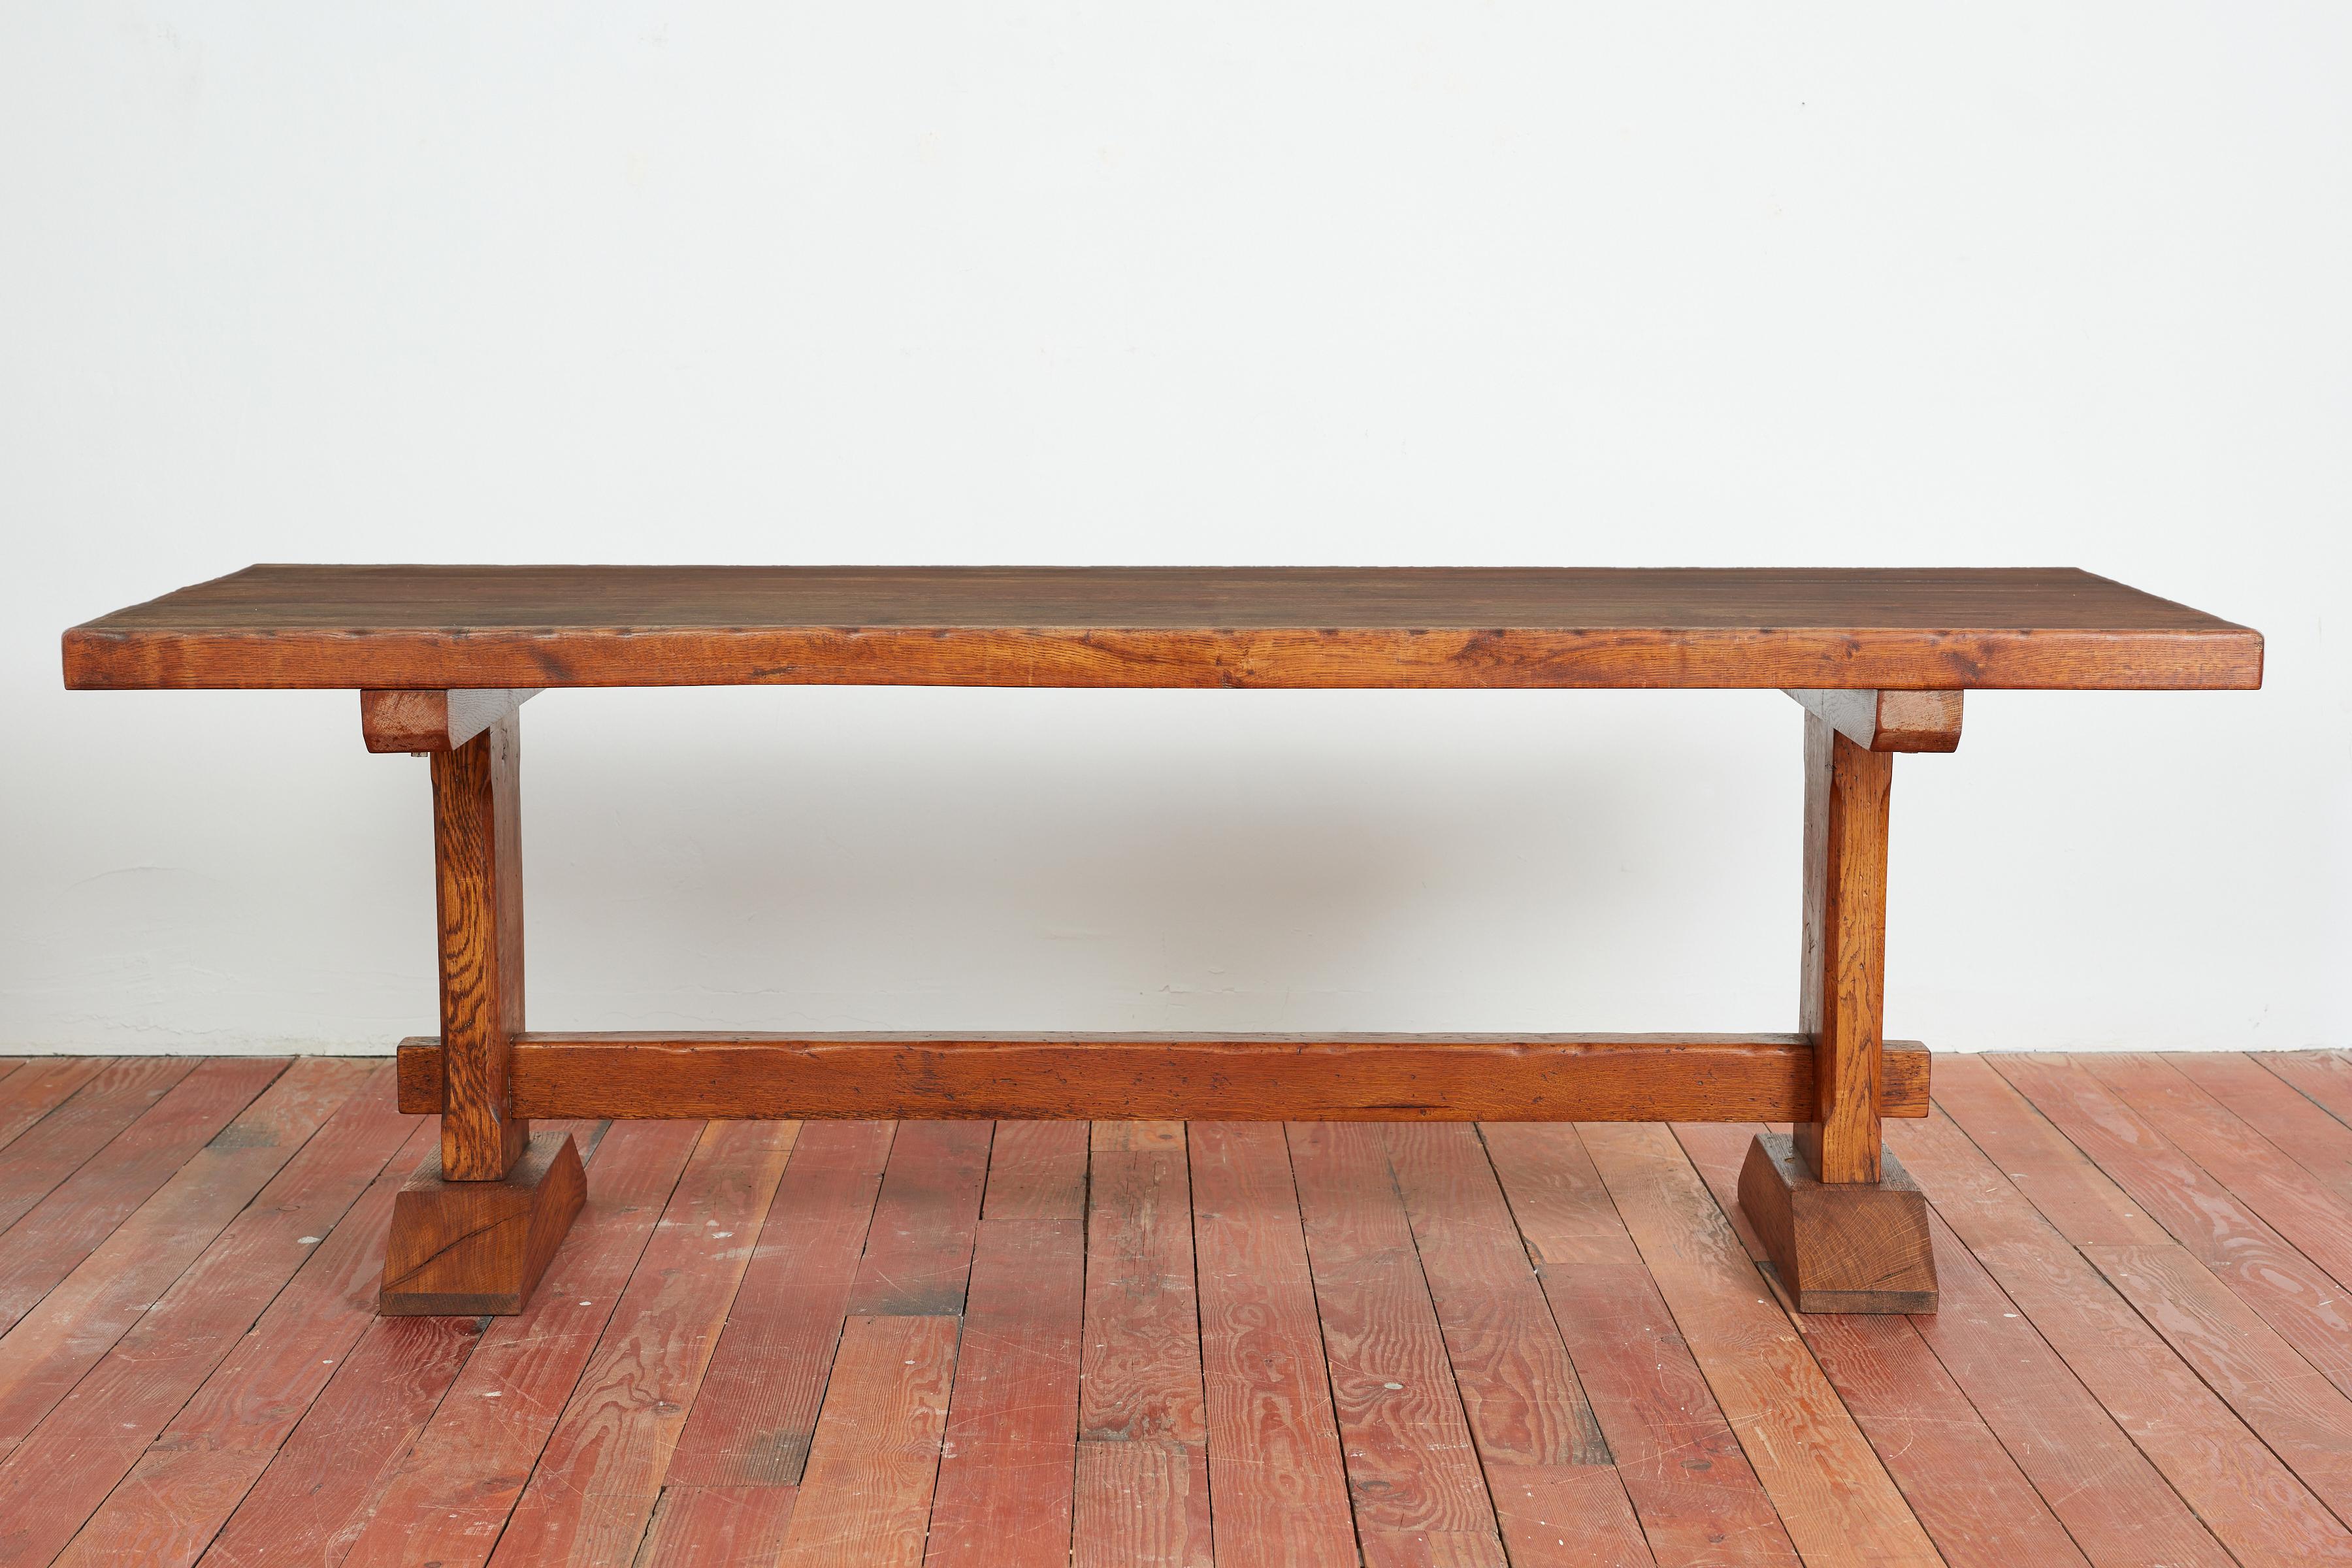 Gorgeous French Oak Farm table - France, circa 1940s
Rich dark oak patina with wonderful grain and joinery 
It's the perfect table! 
